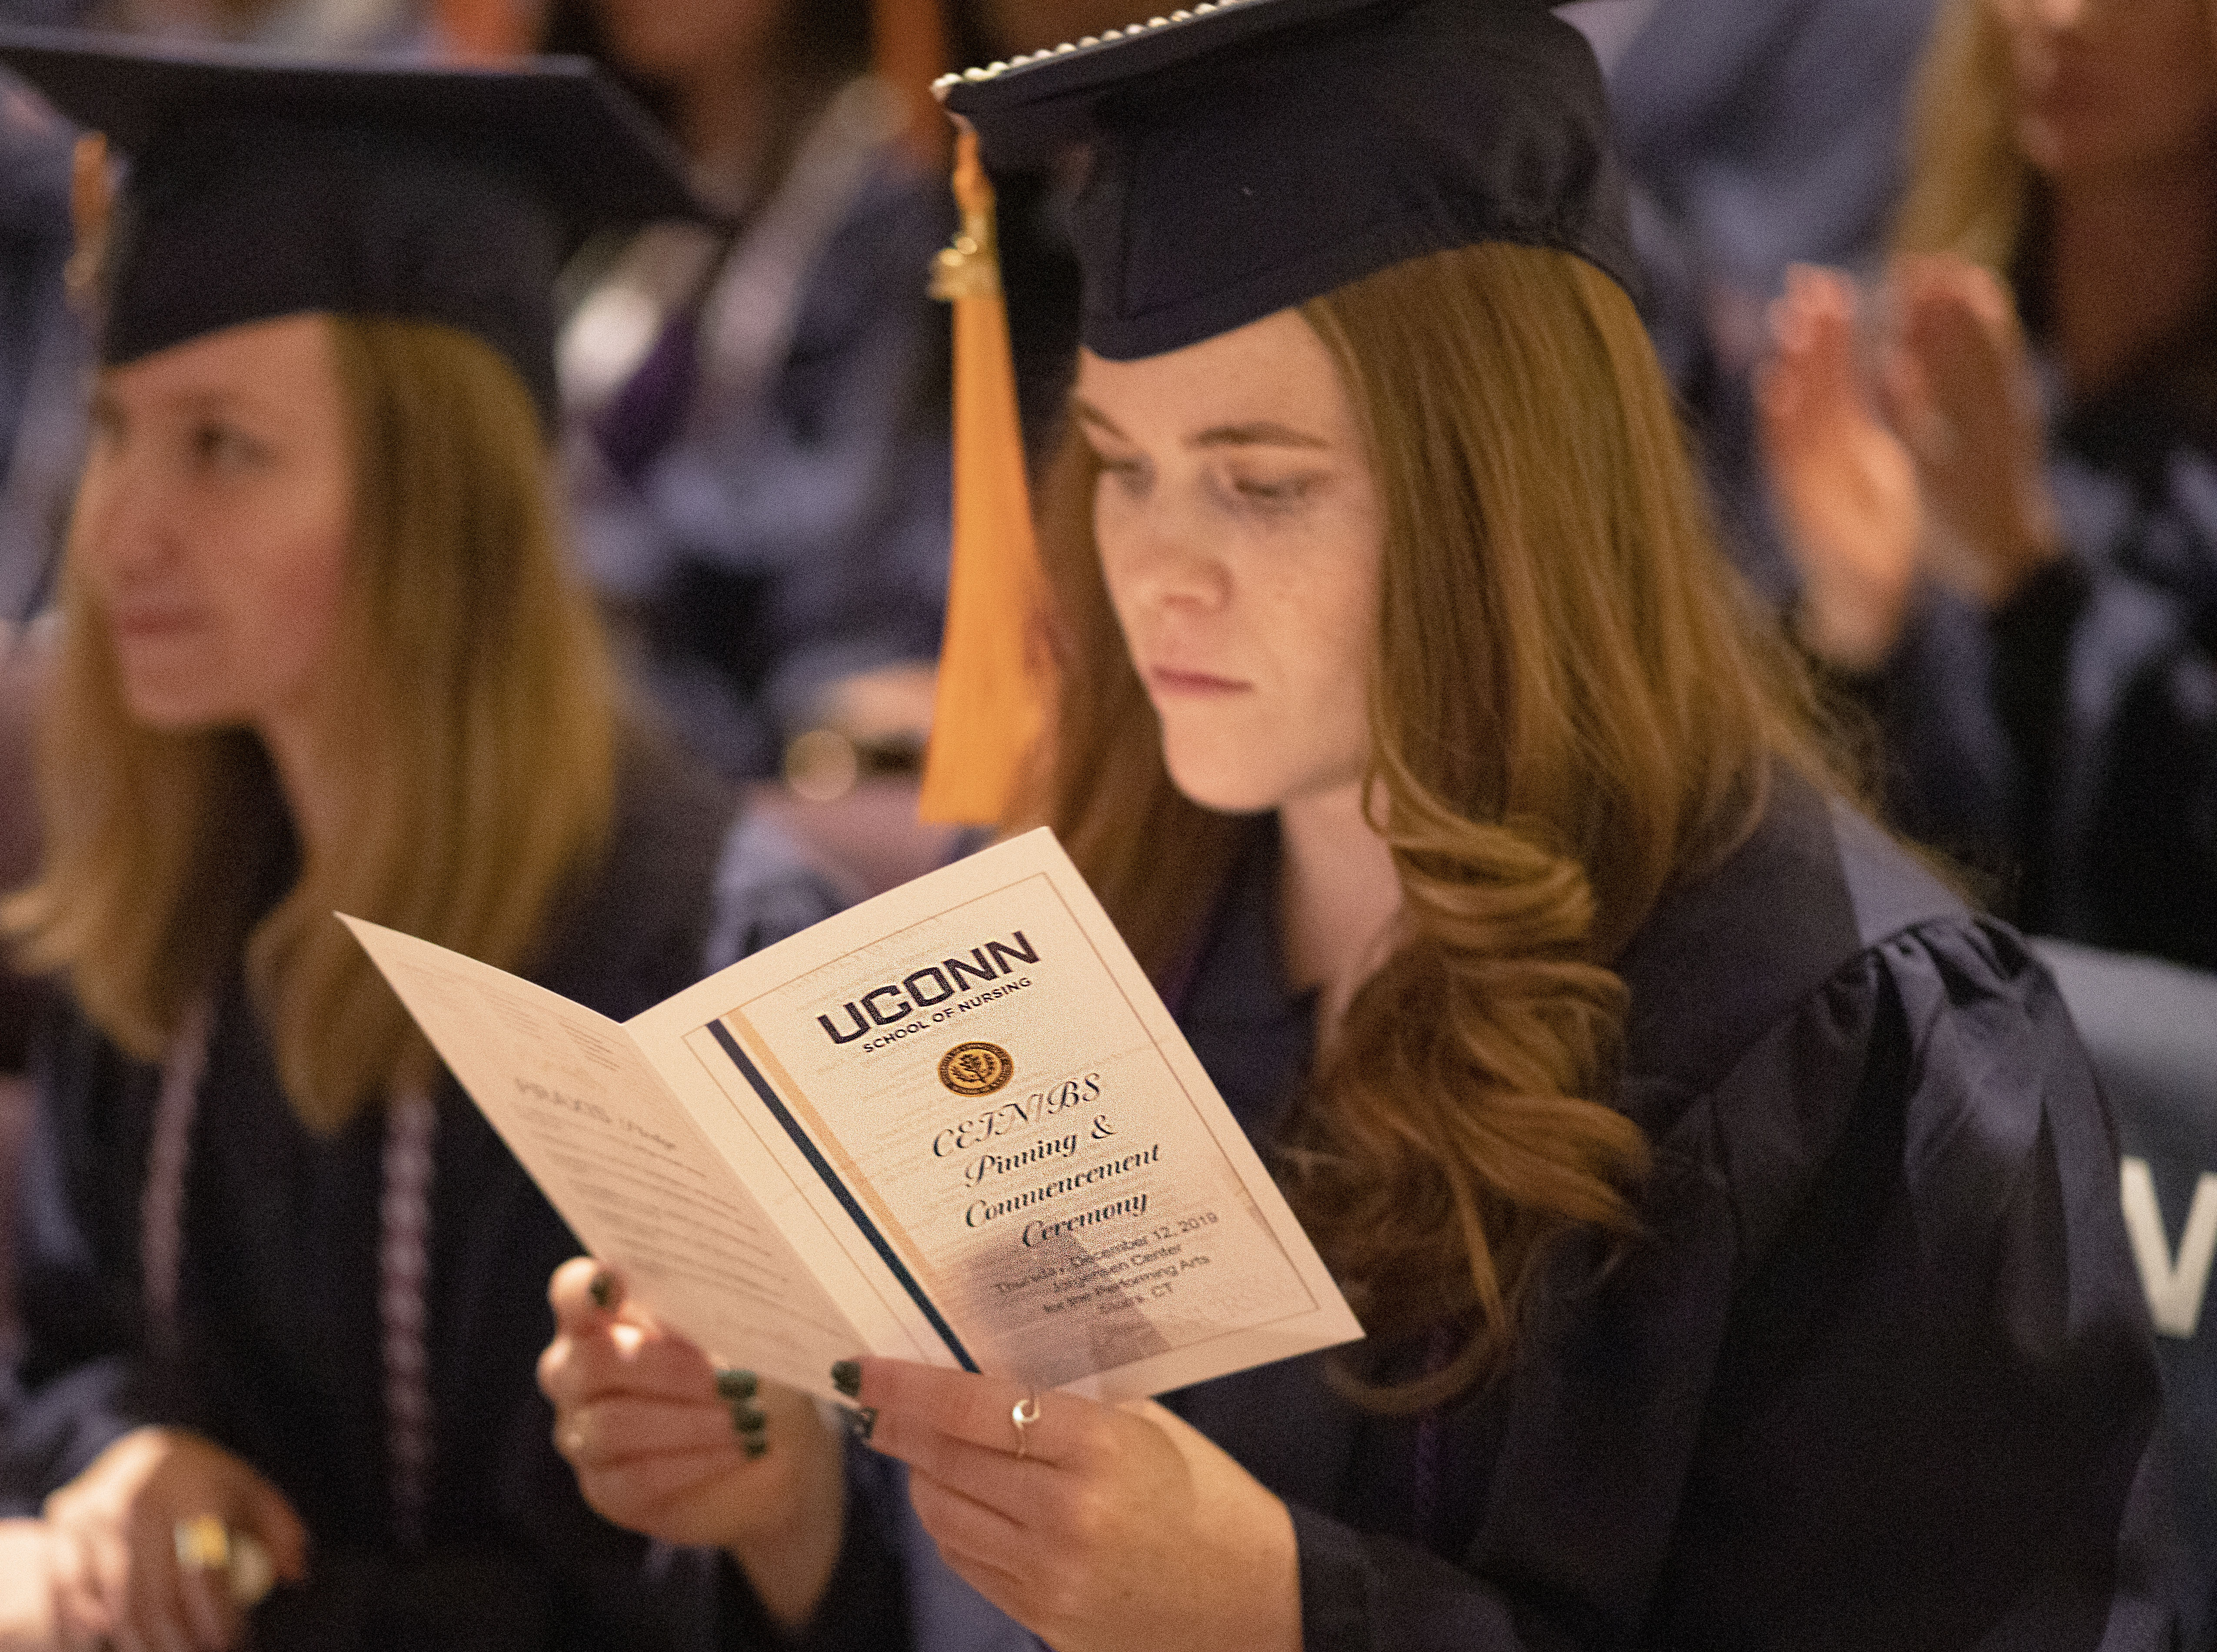 A student, dressed in a commencement cap and gown, reads the program for the UConn School of Nursing's CEIN/BS Pinning and Commencement Ceremony on December 12, 2019